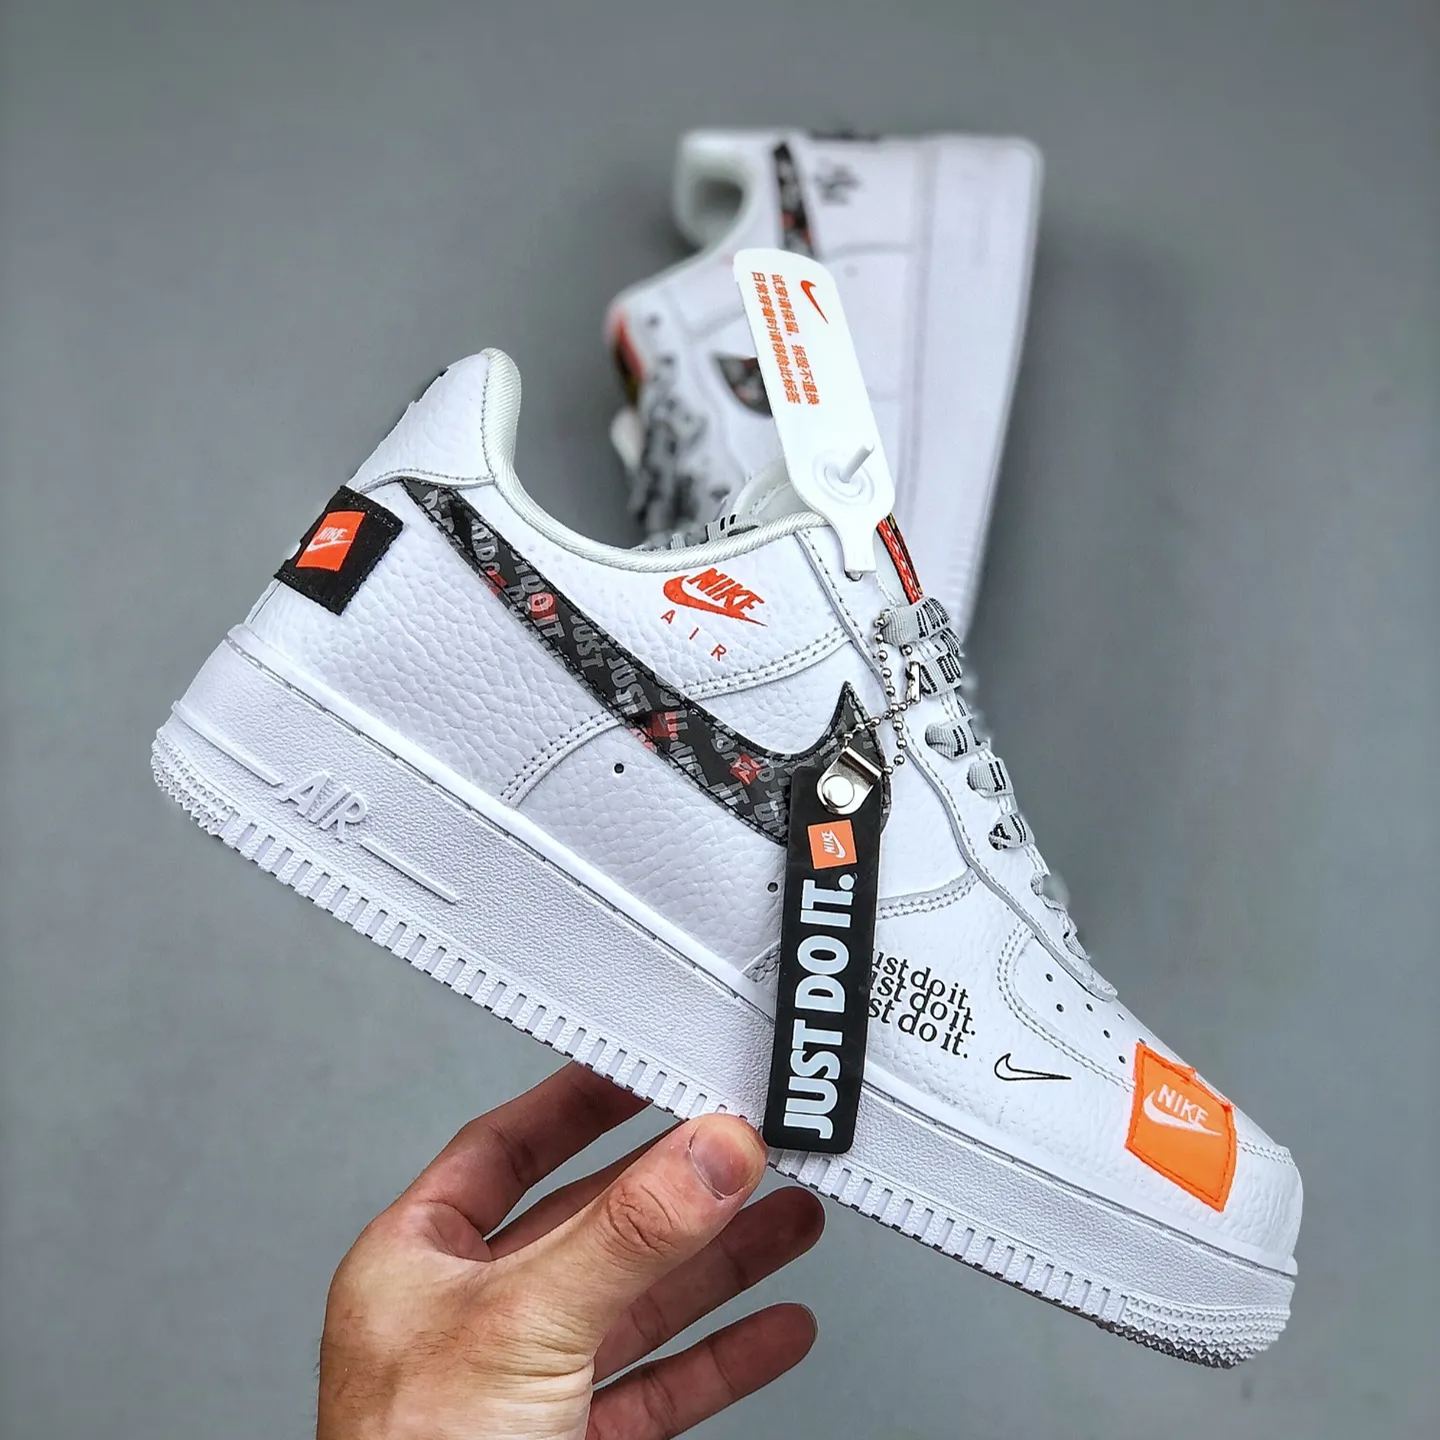 Nike Air Force 1 Low Premium Low Just Do It 